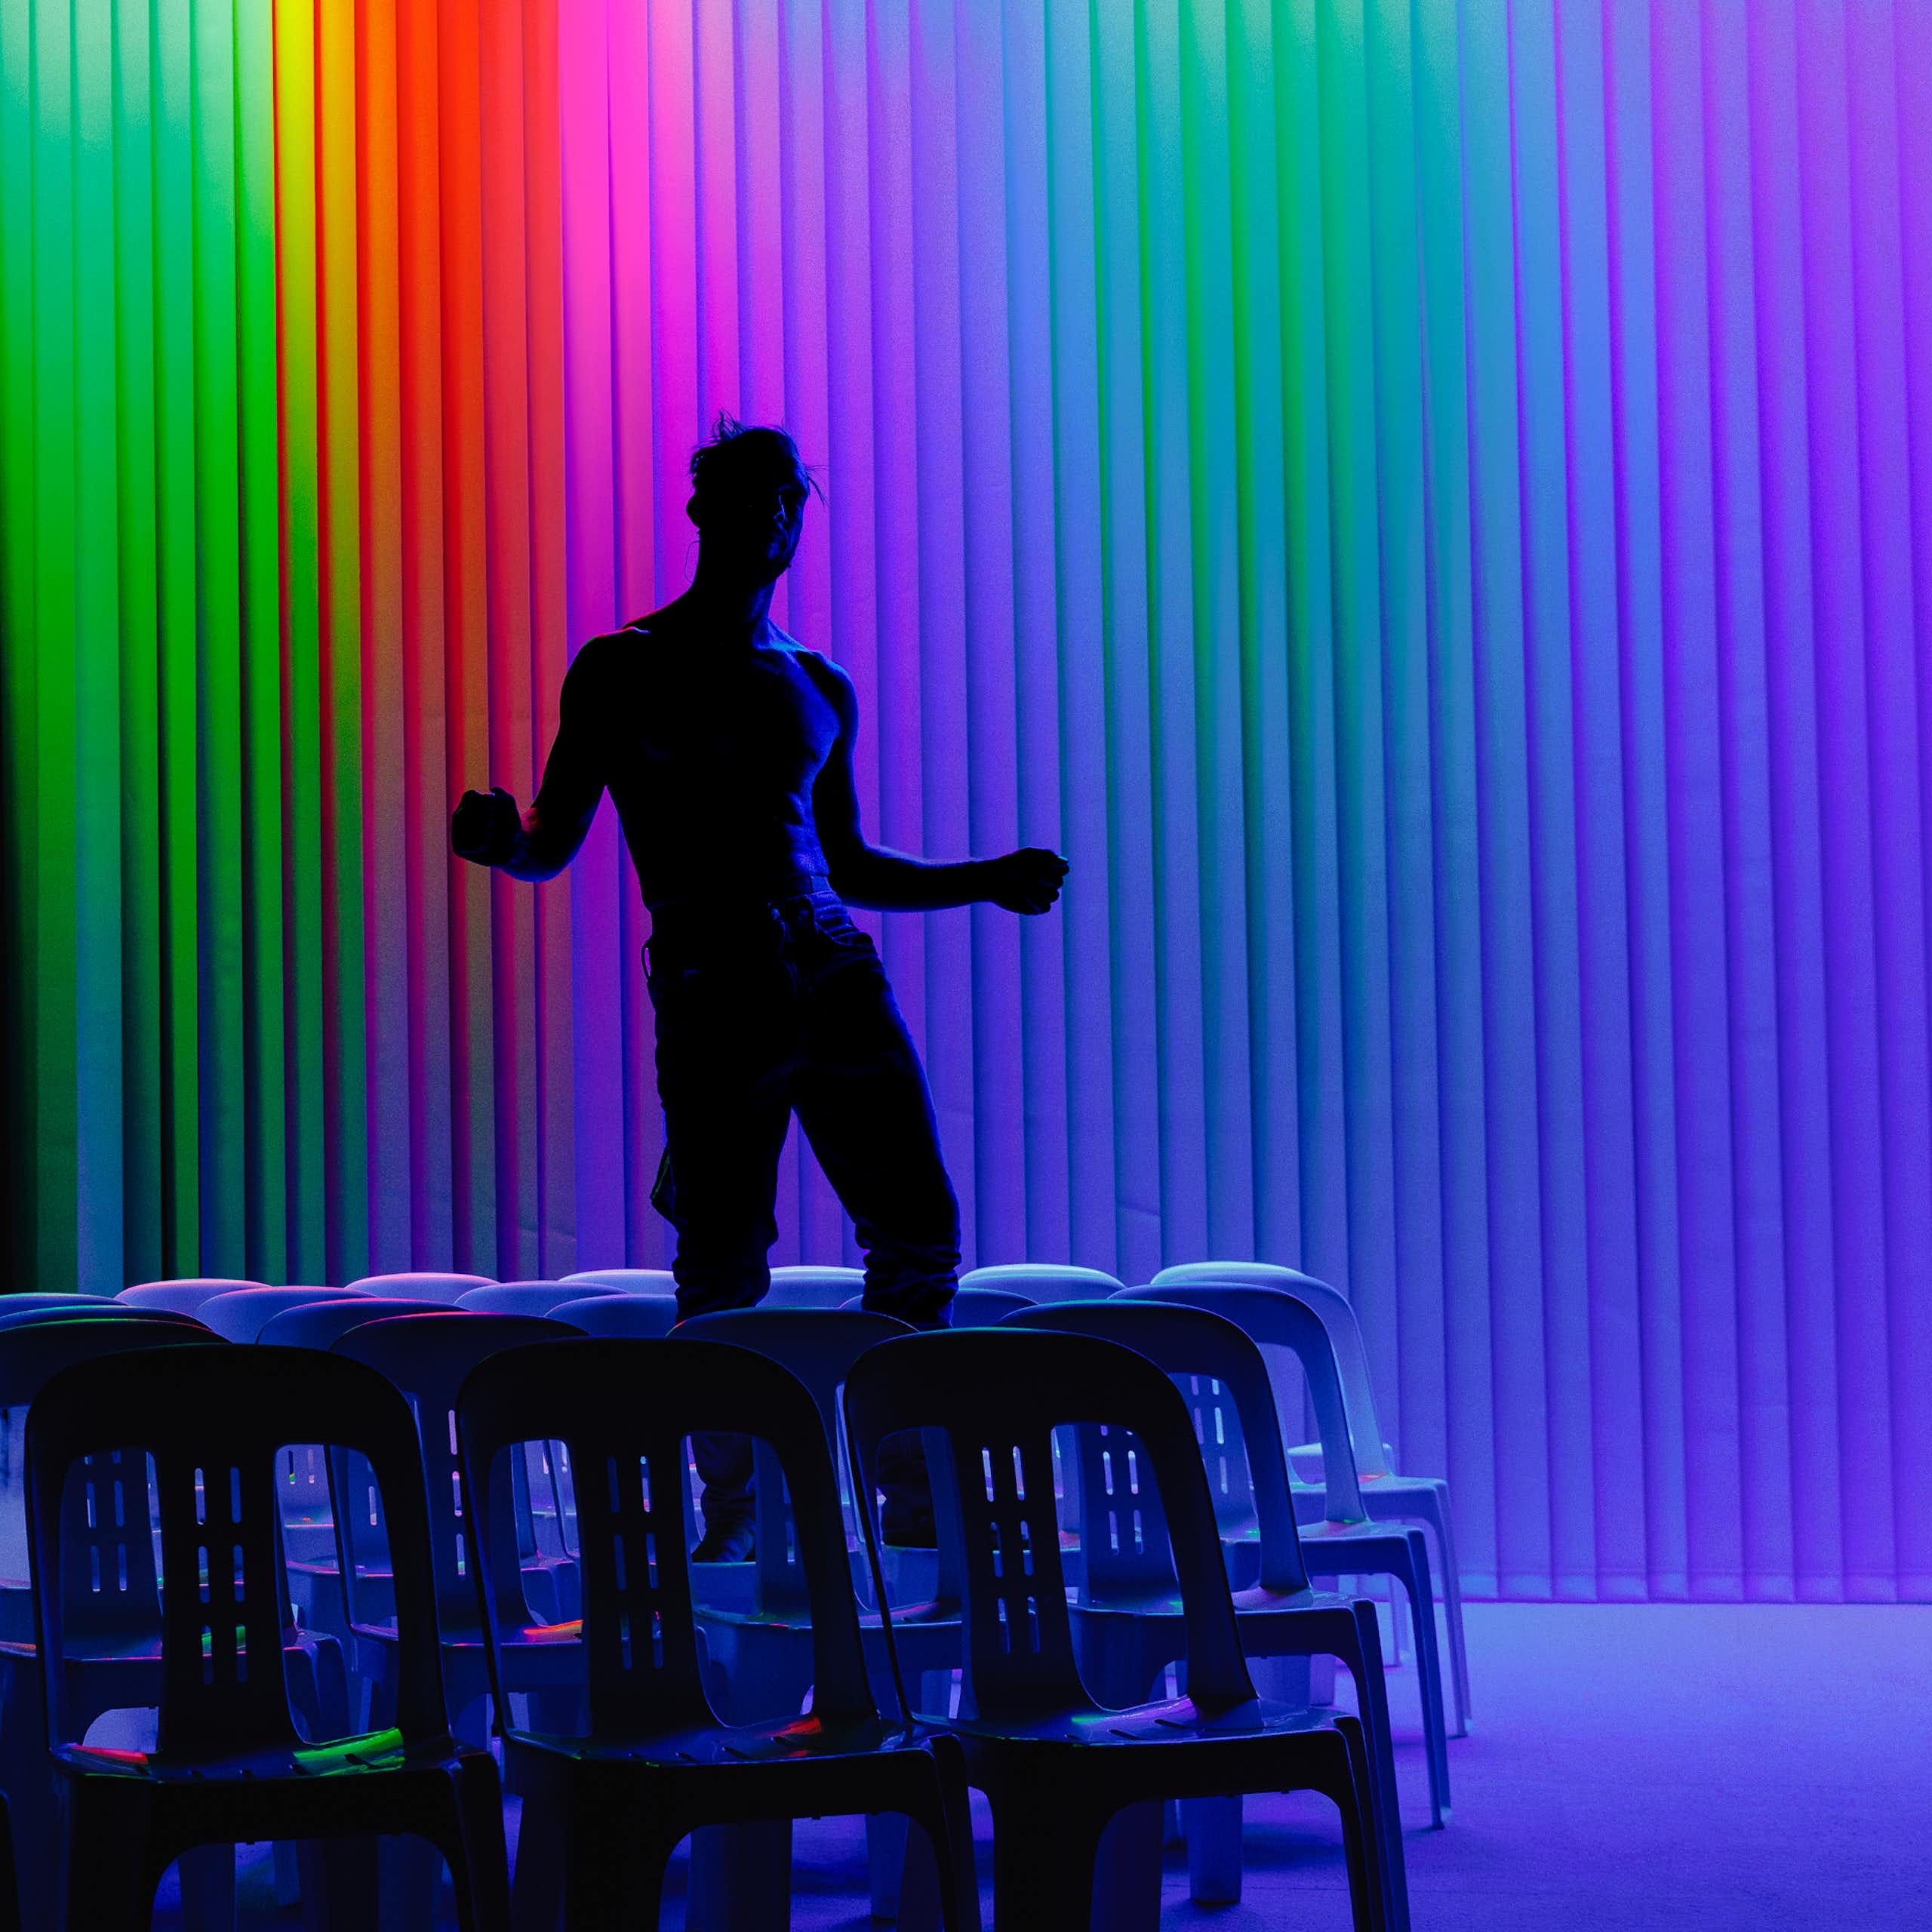 The silhouette of a man against a rainbow backdrop